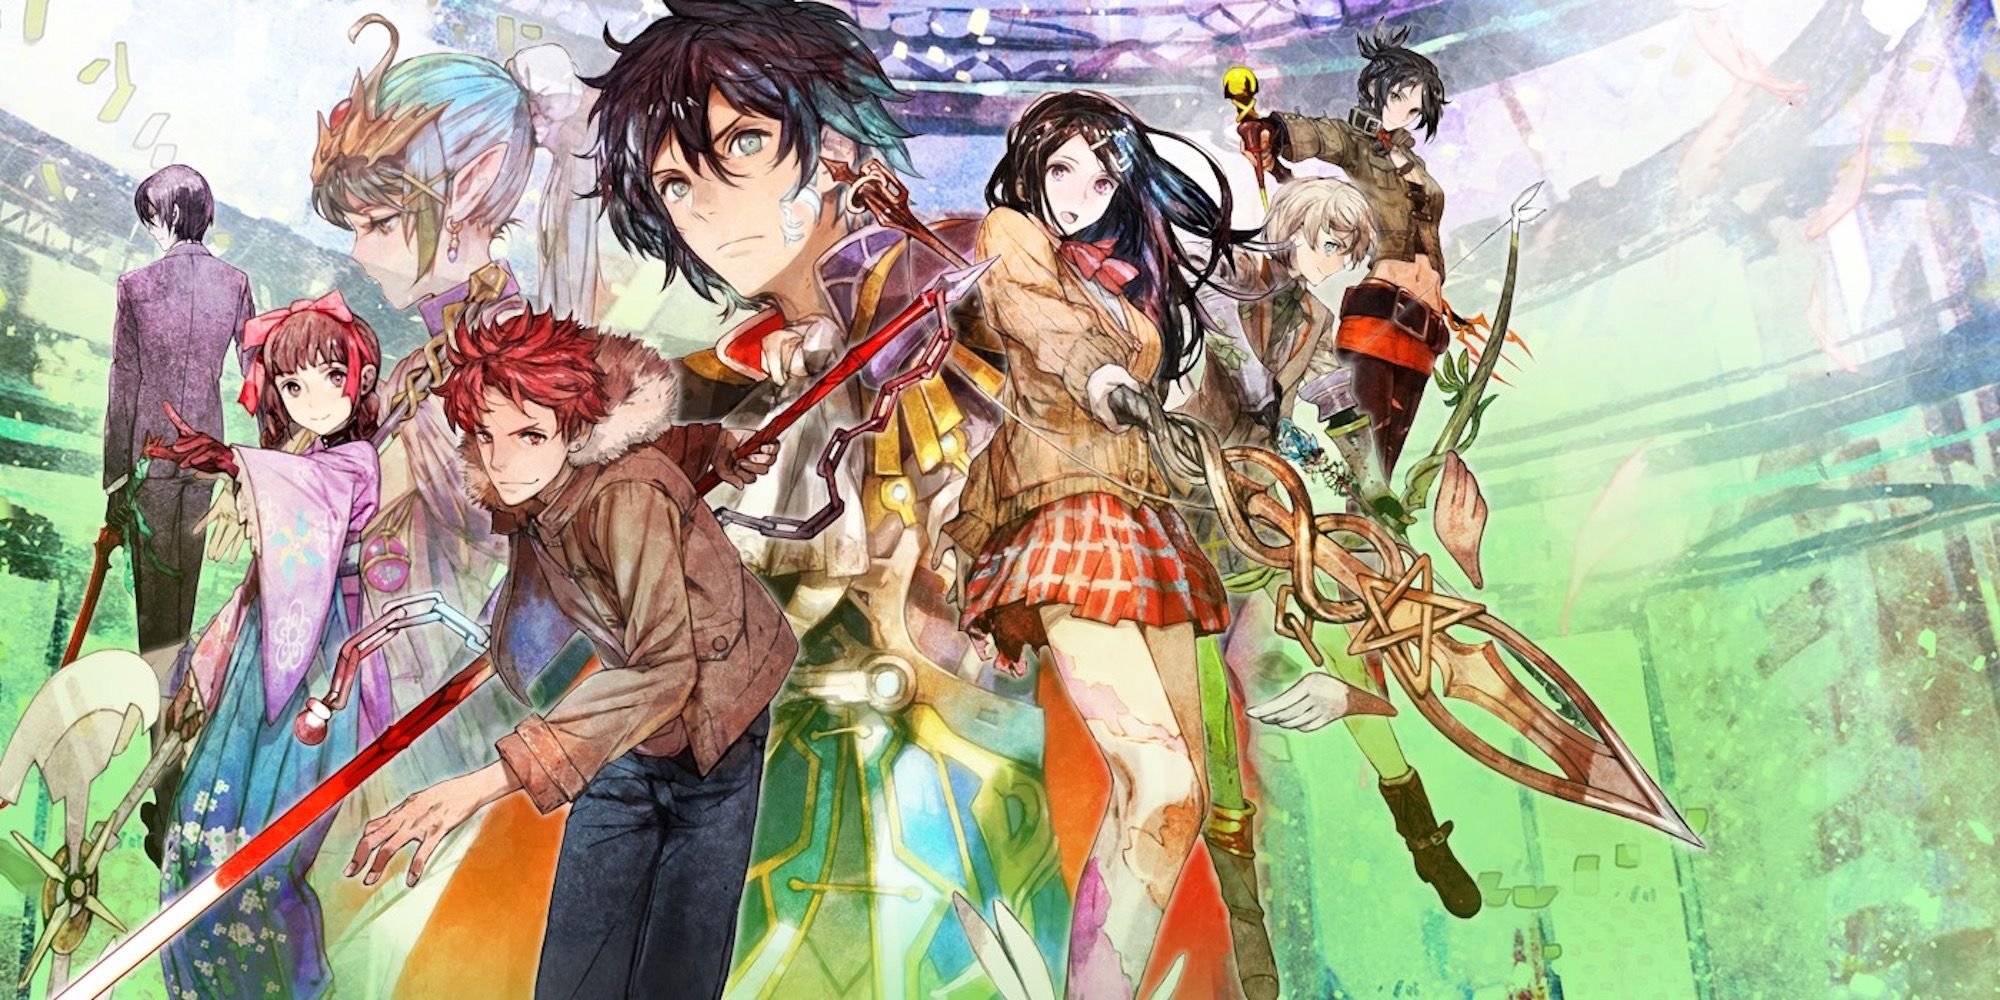 Promo art featuring characters in Tokyo Mirage Sessions